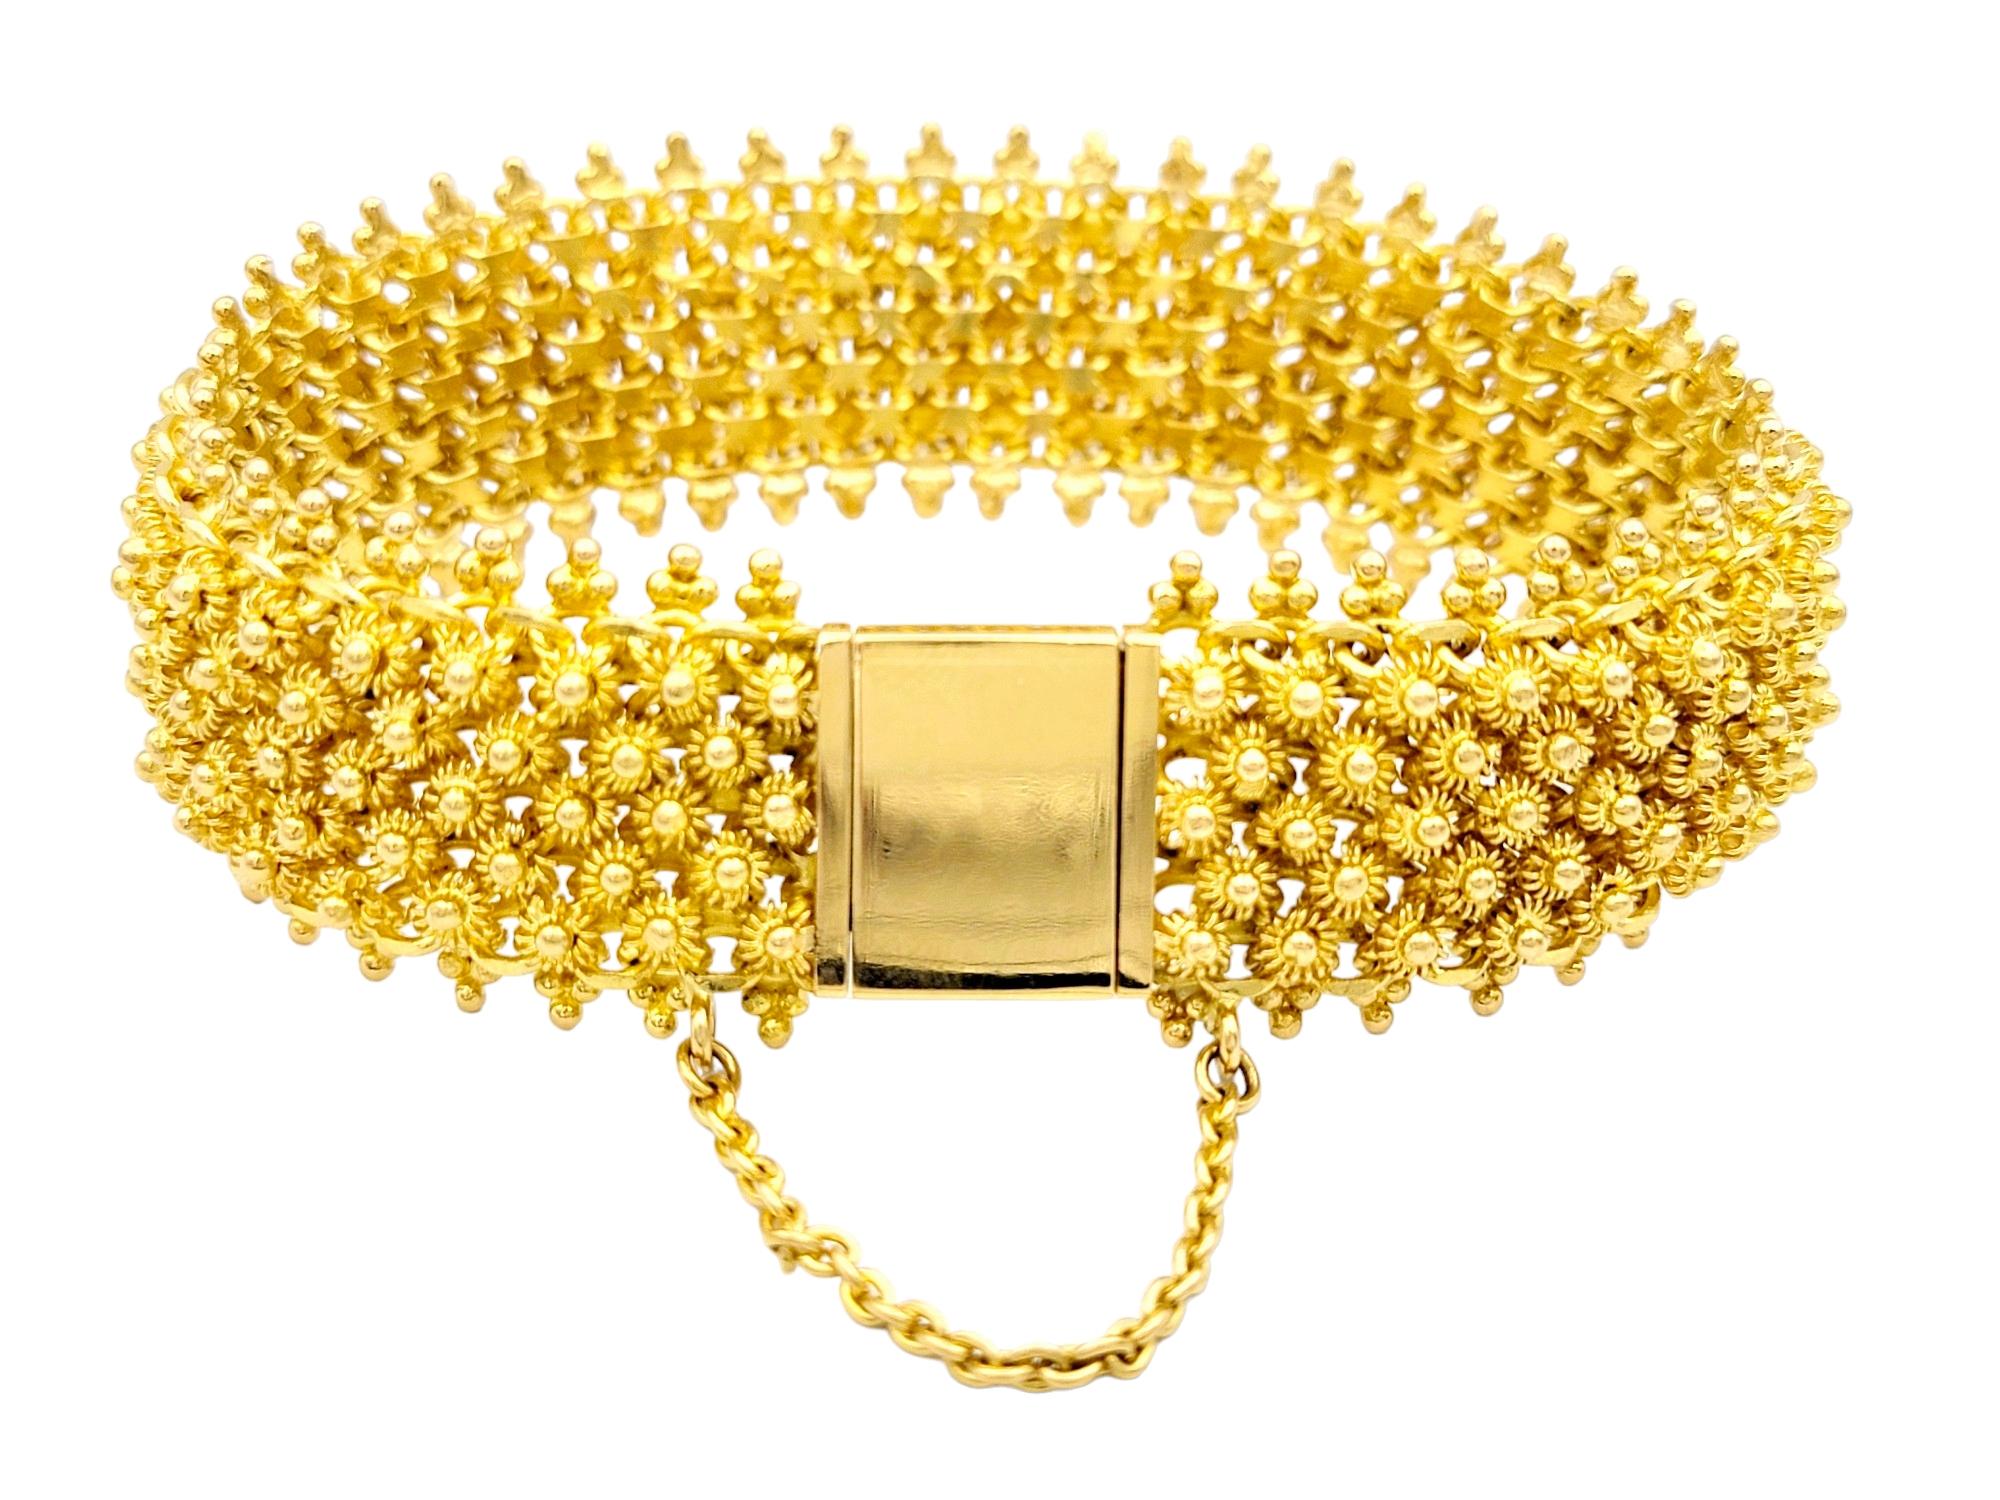 This luxurious textured gold bracelet is crafted in opulent 22 karat yellow gold. The bracelet boasts a wide and flexible design, composed of a series of intricate wire flower motifs that weave together seamlessly, creating a unique and luxurious